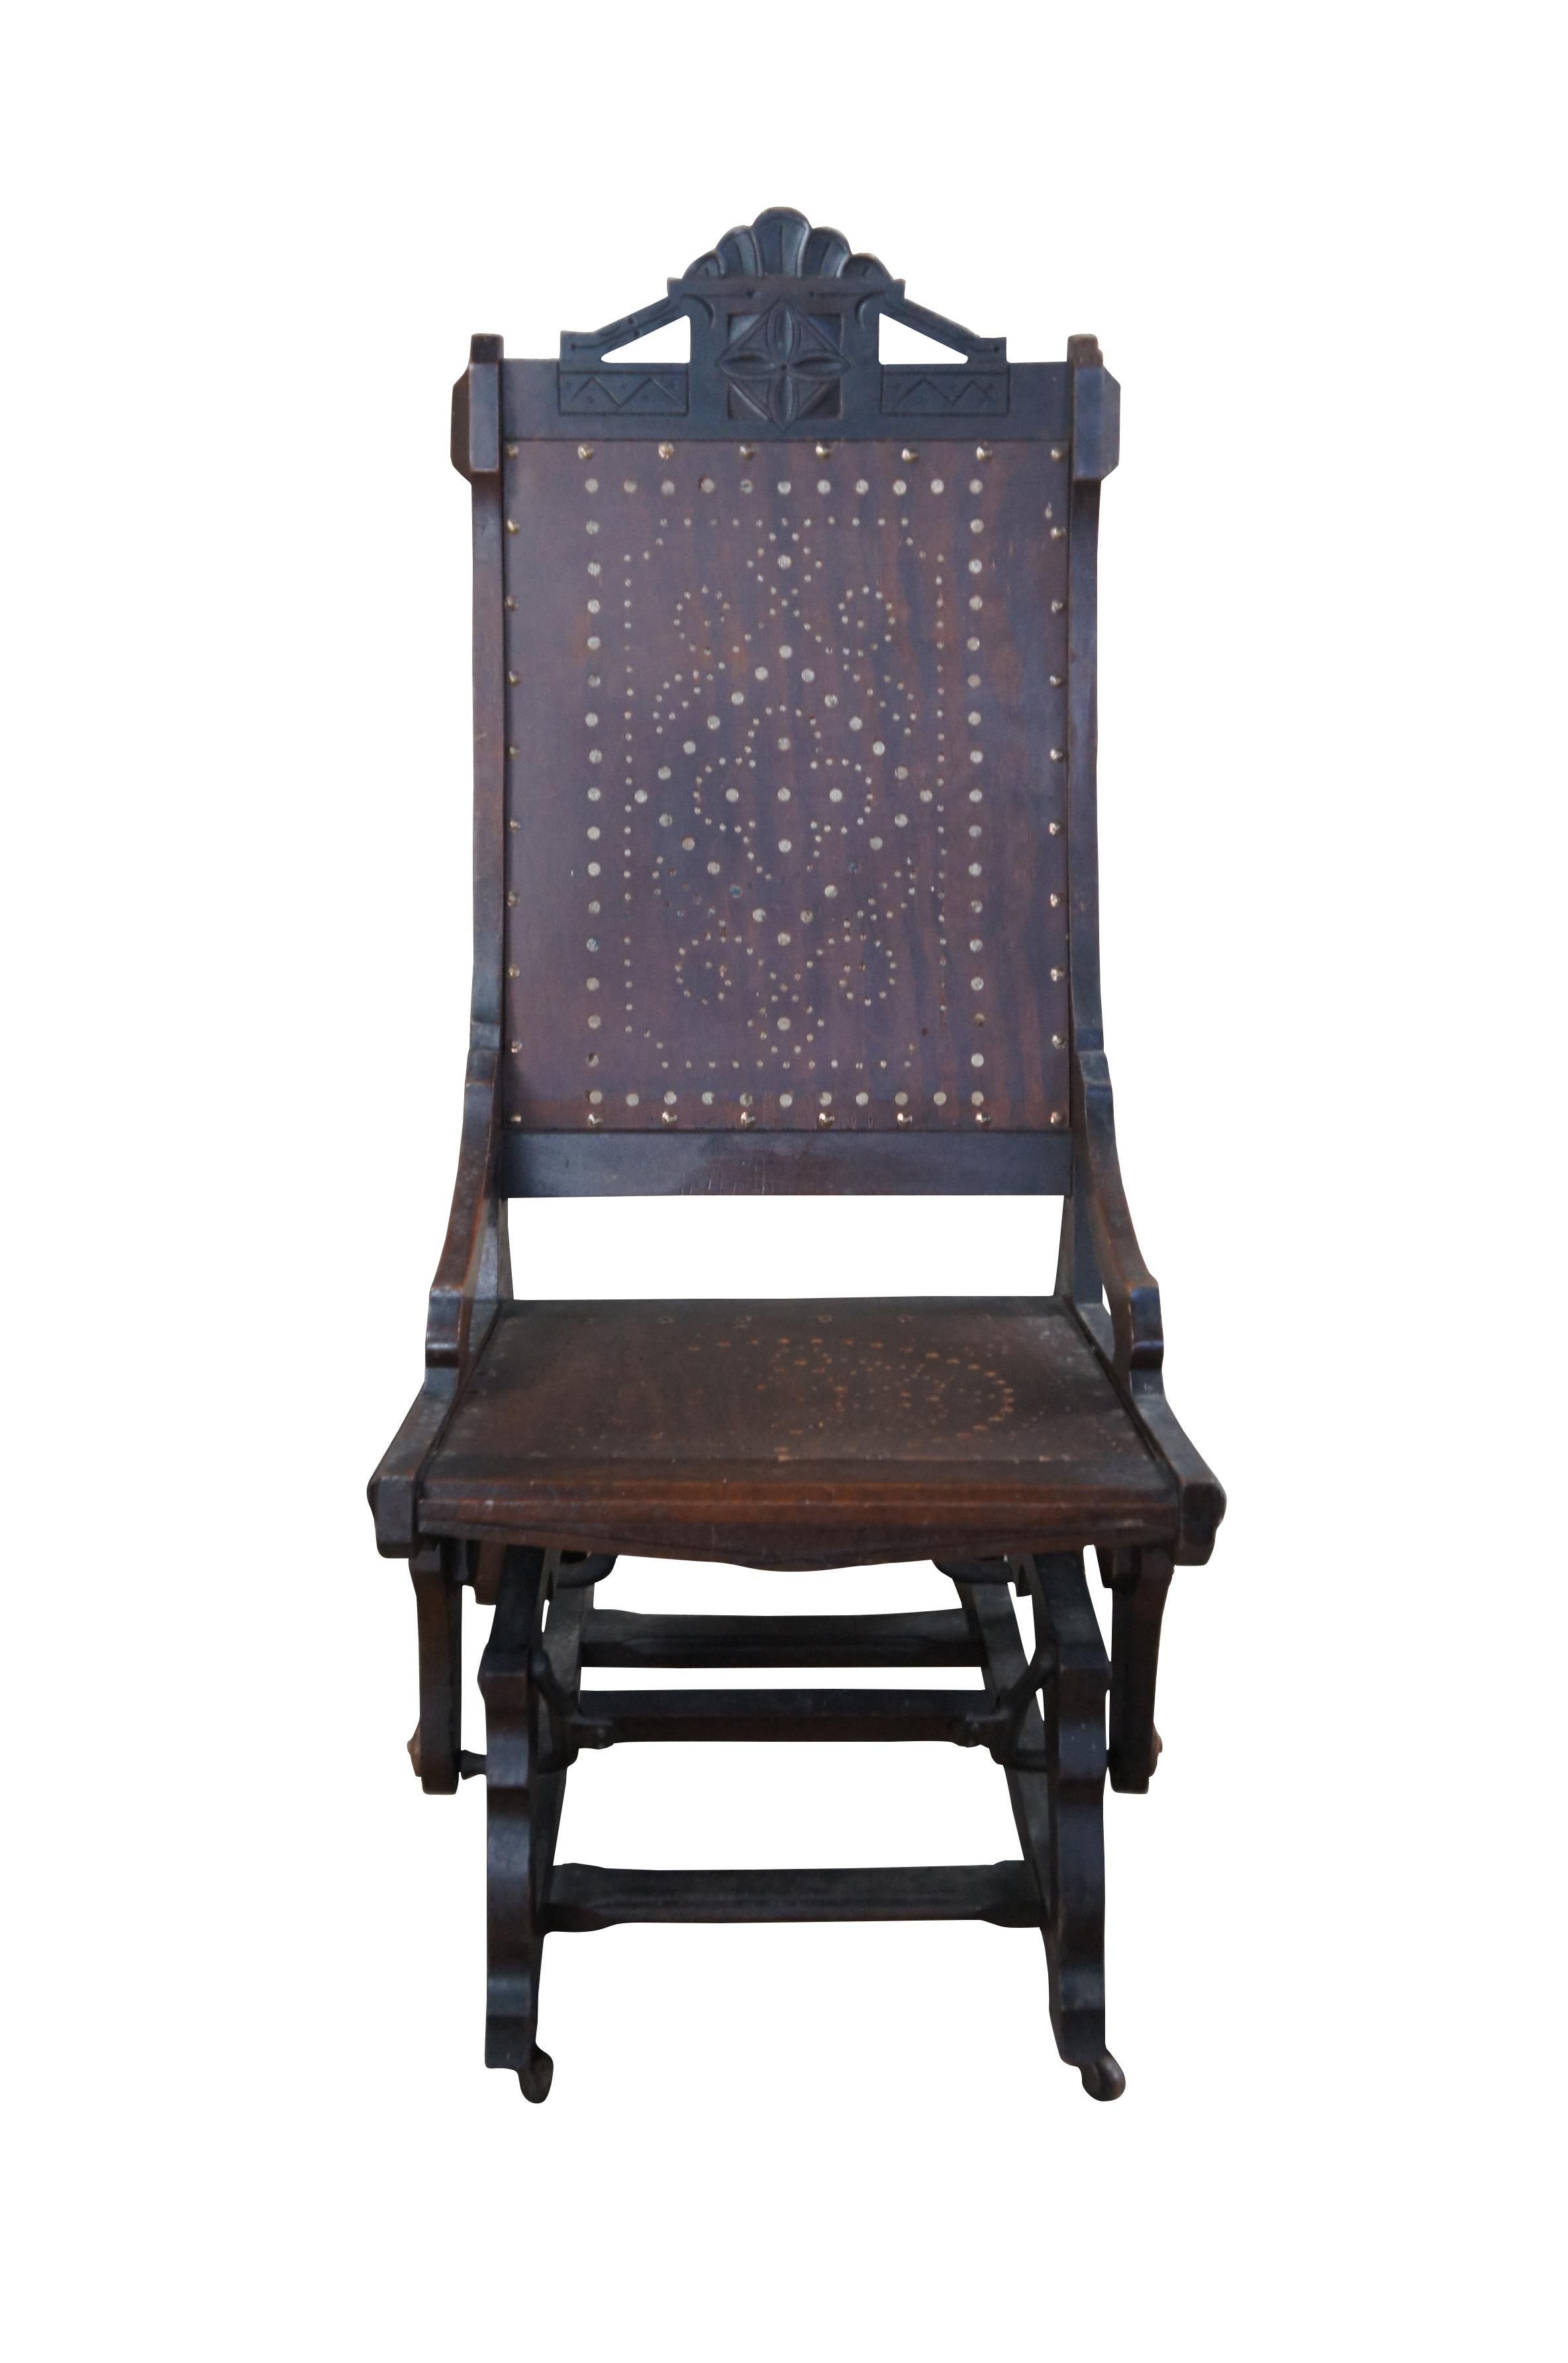 A lovely Aesthetic Era platform or gliding rocking chair by Lowentraut, circa 1876-1888.  Made from oak with a carved crest rail and unique Gothic style pierced seat and back.  

Dimensions: 
28